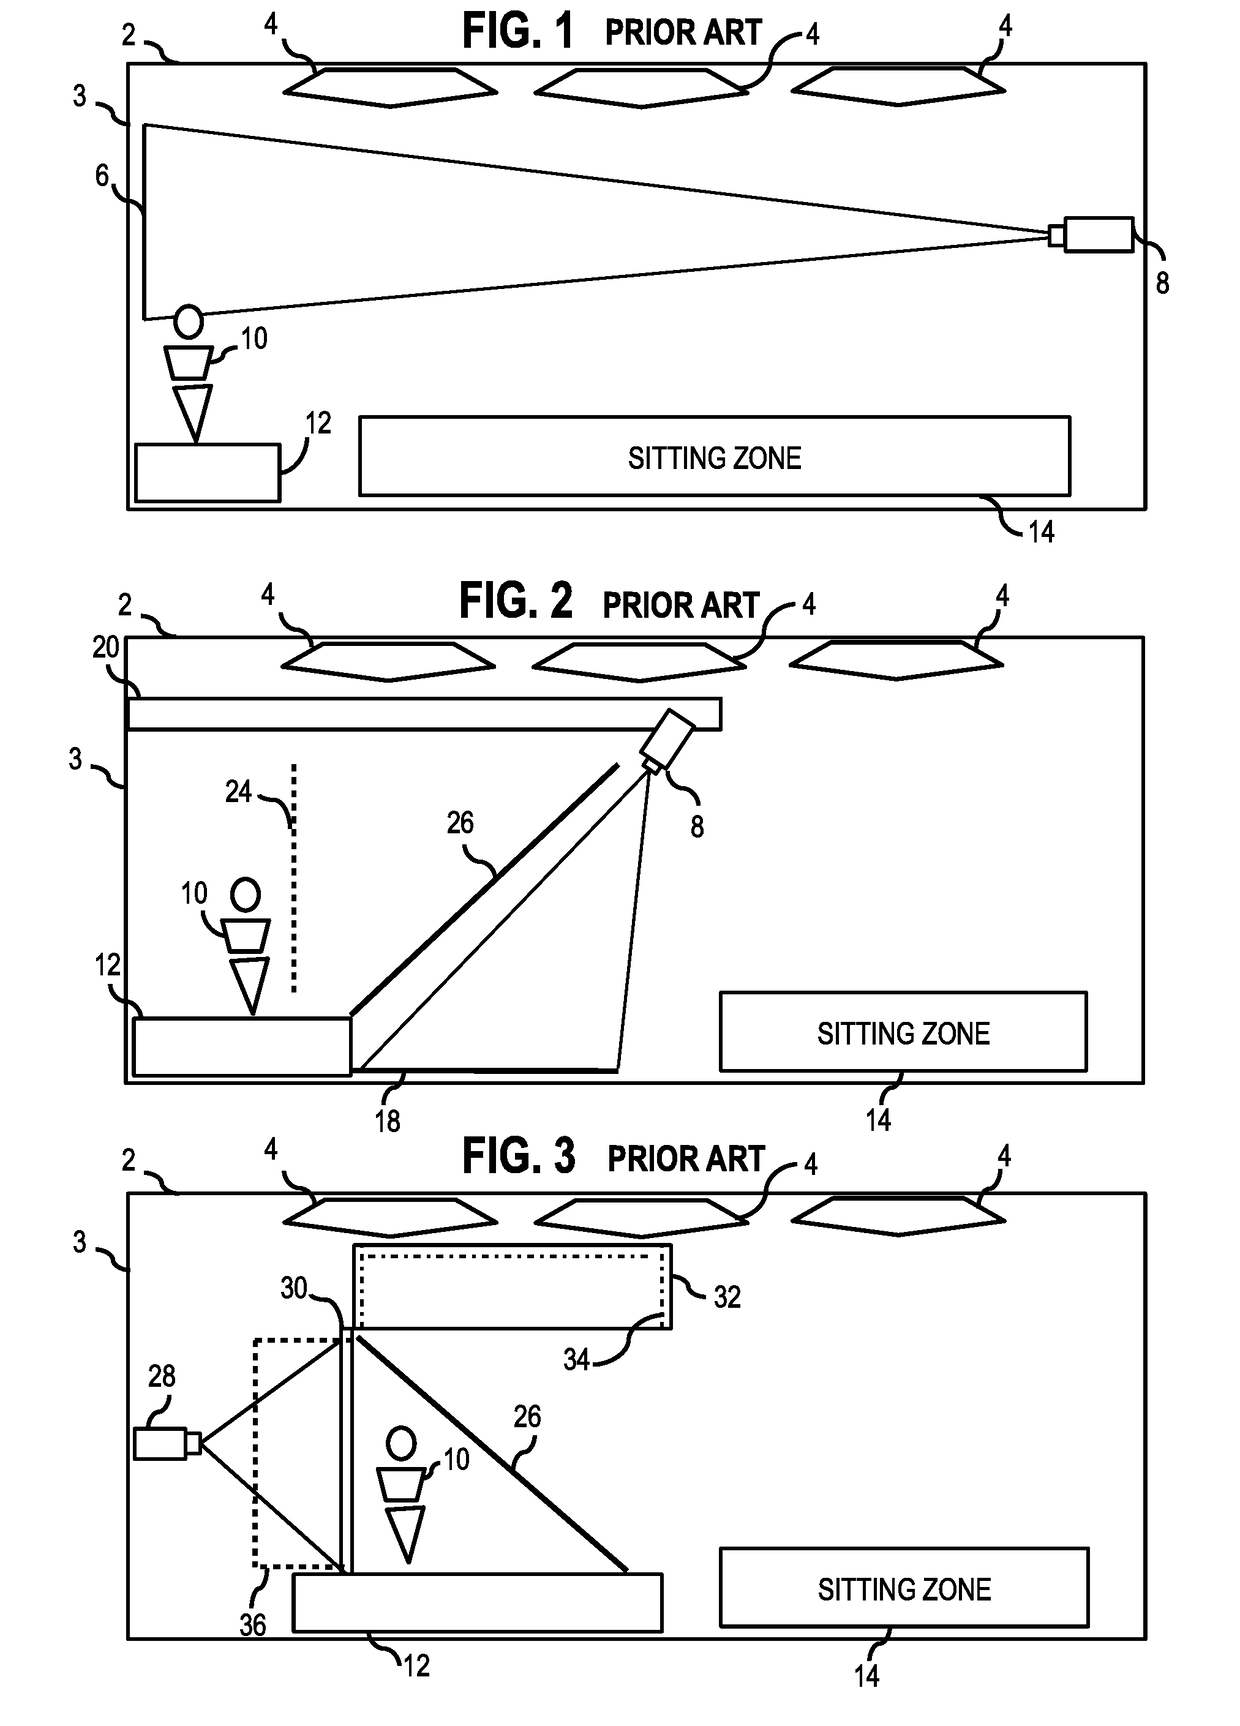 Communication stage and display systems